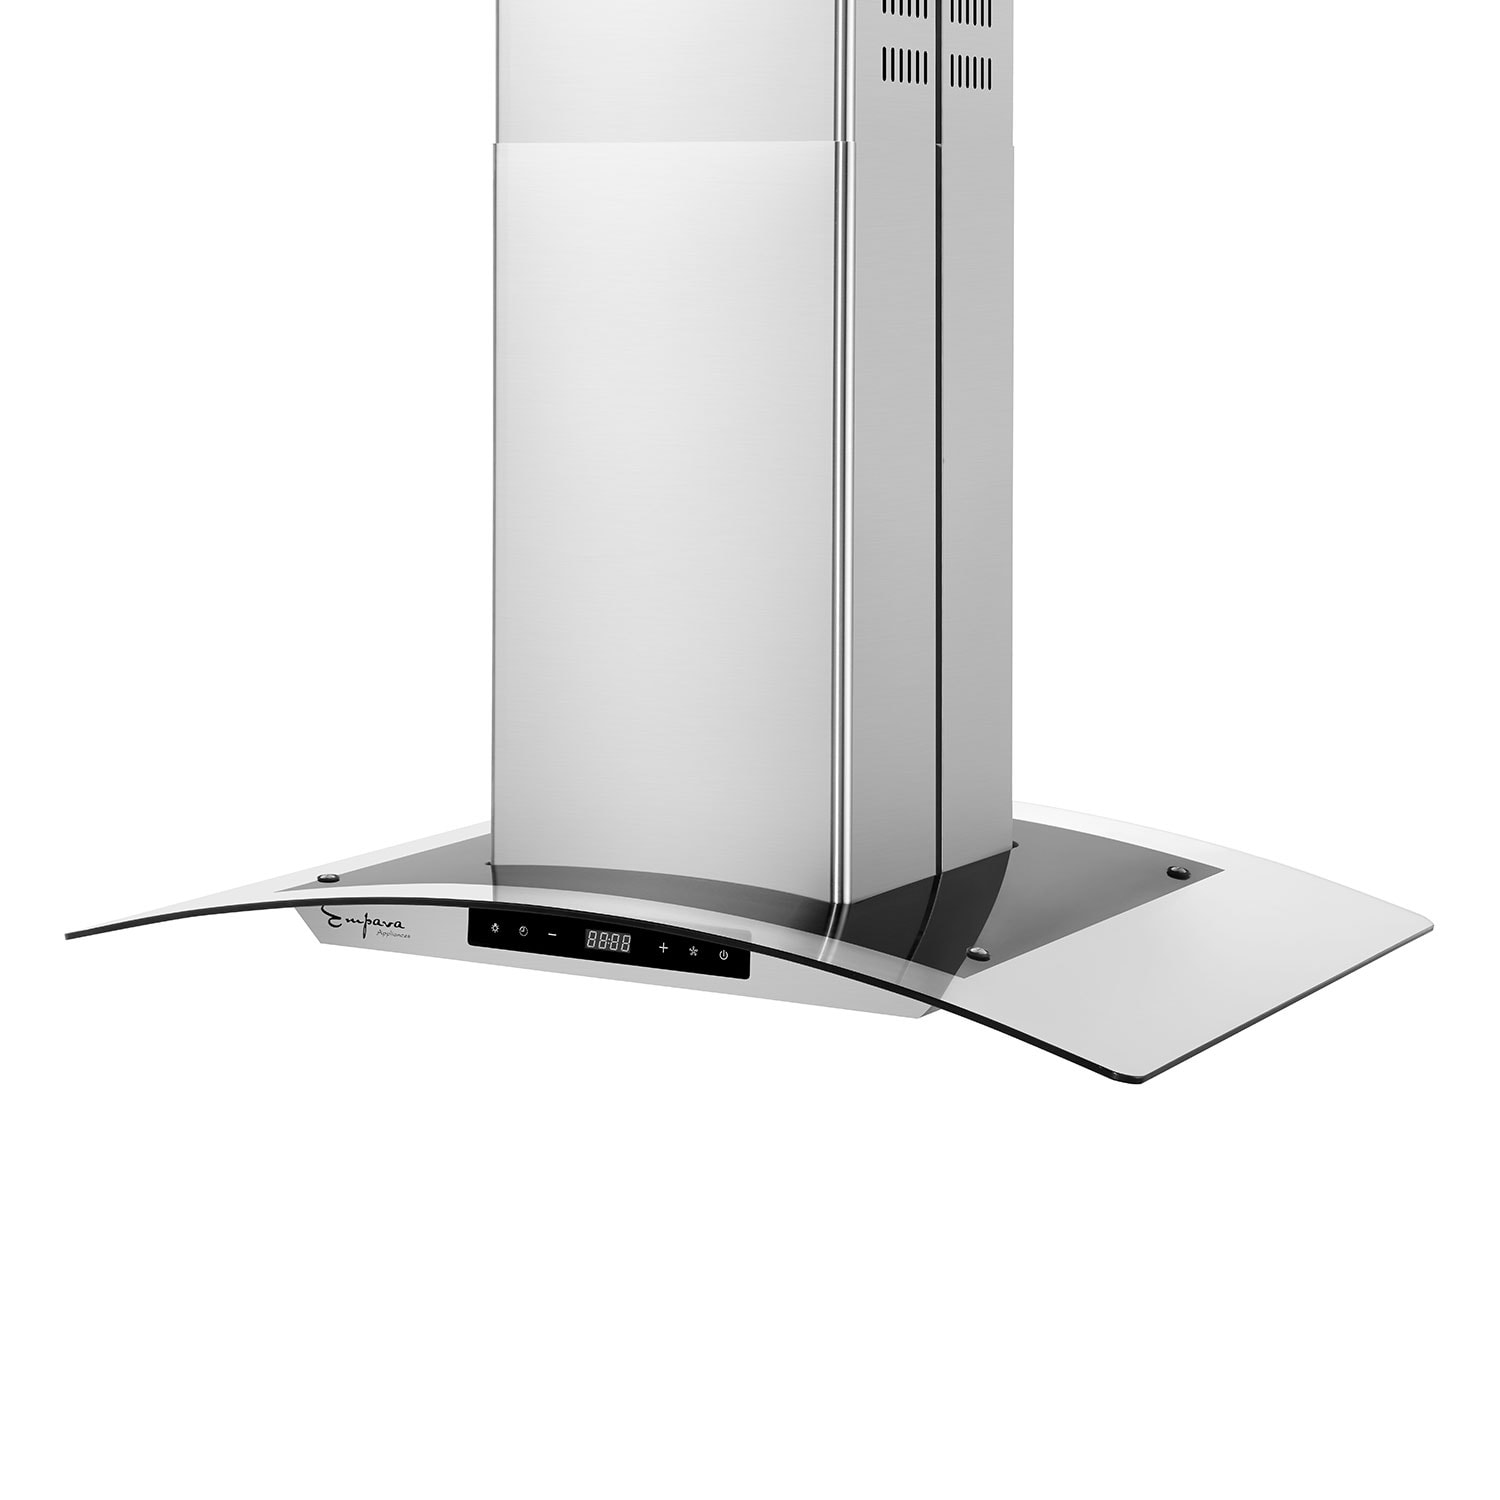 IKTCH 36/30-inch Ducted Insert Range Hood, 900 CFM Stainless Steel Hood with Gesture Control and LED Lights - 36'' - Silver